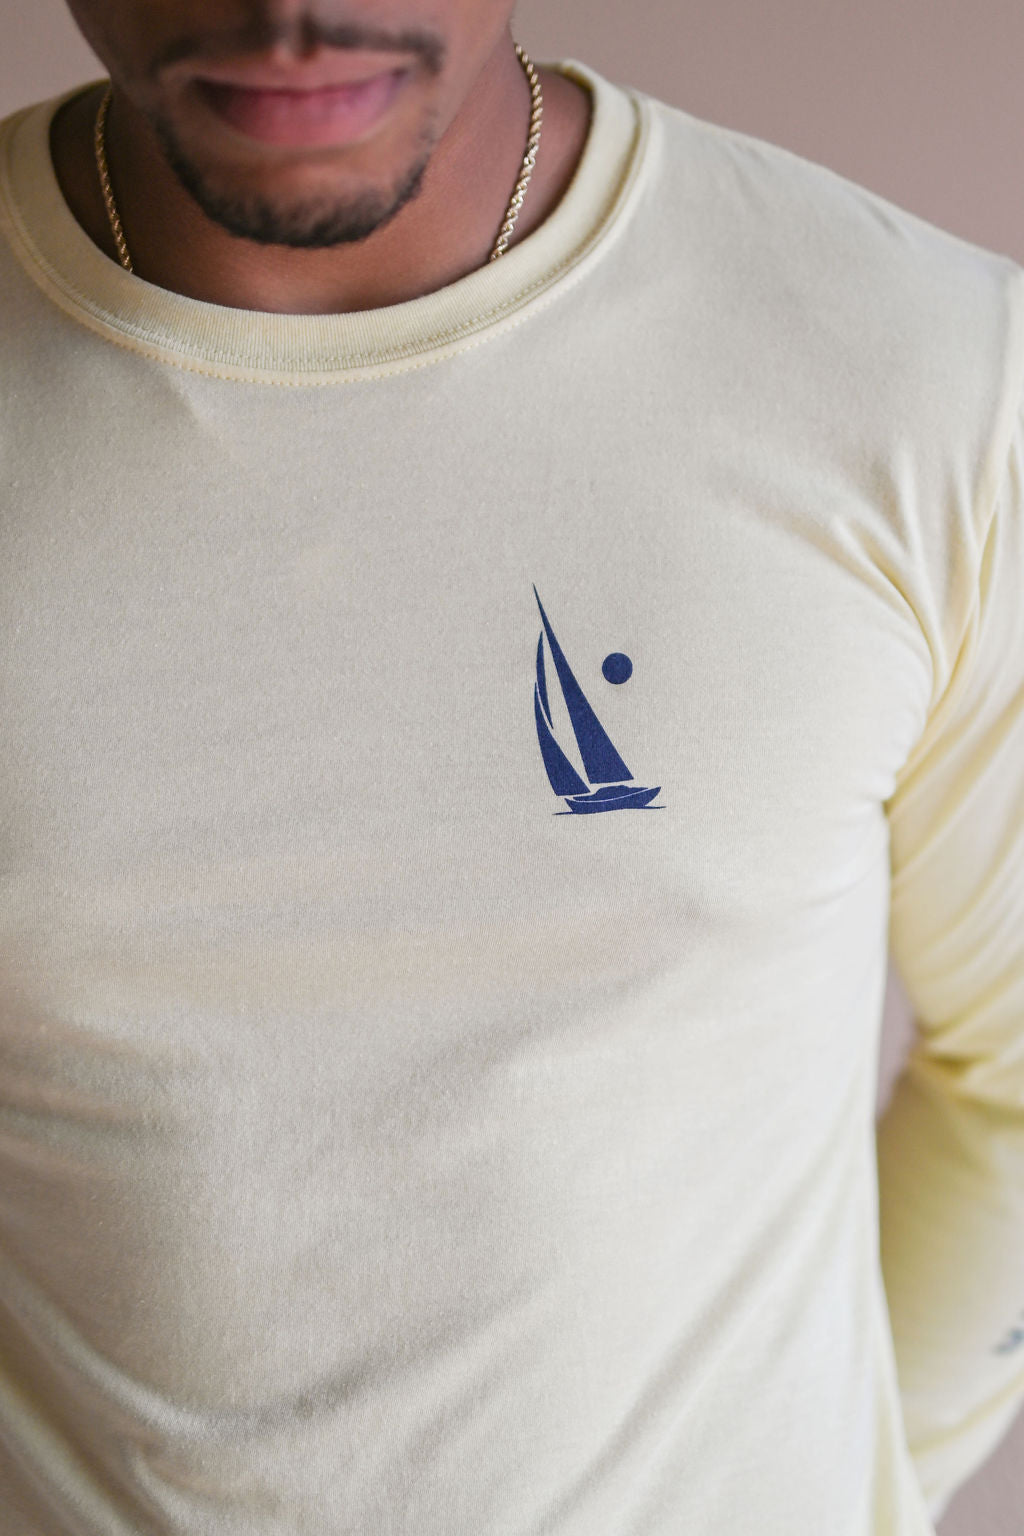 Unisex long sleeve organic shirt with blue sail boat logo and text